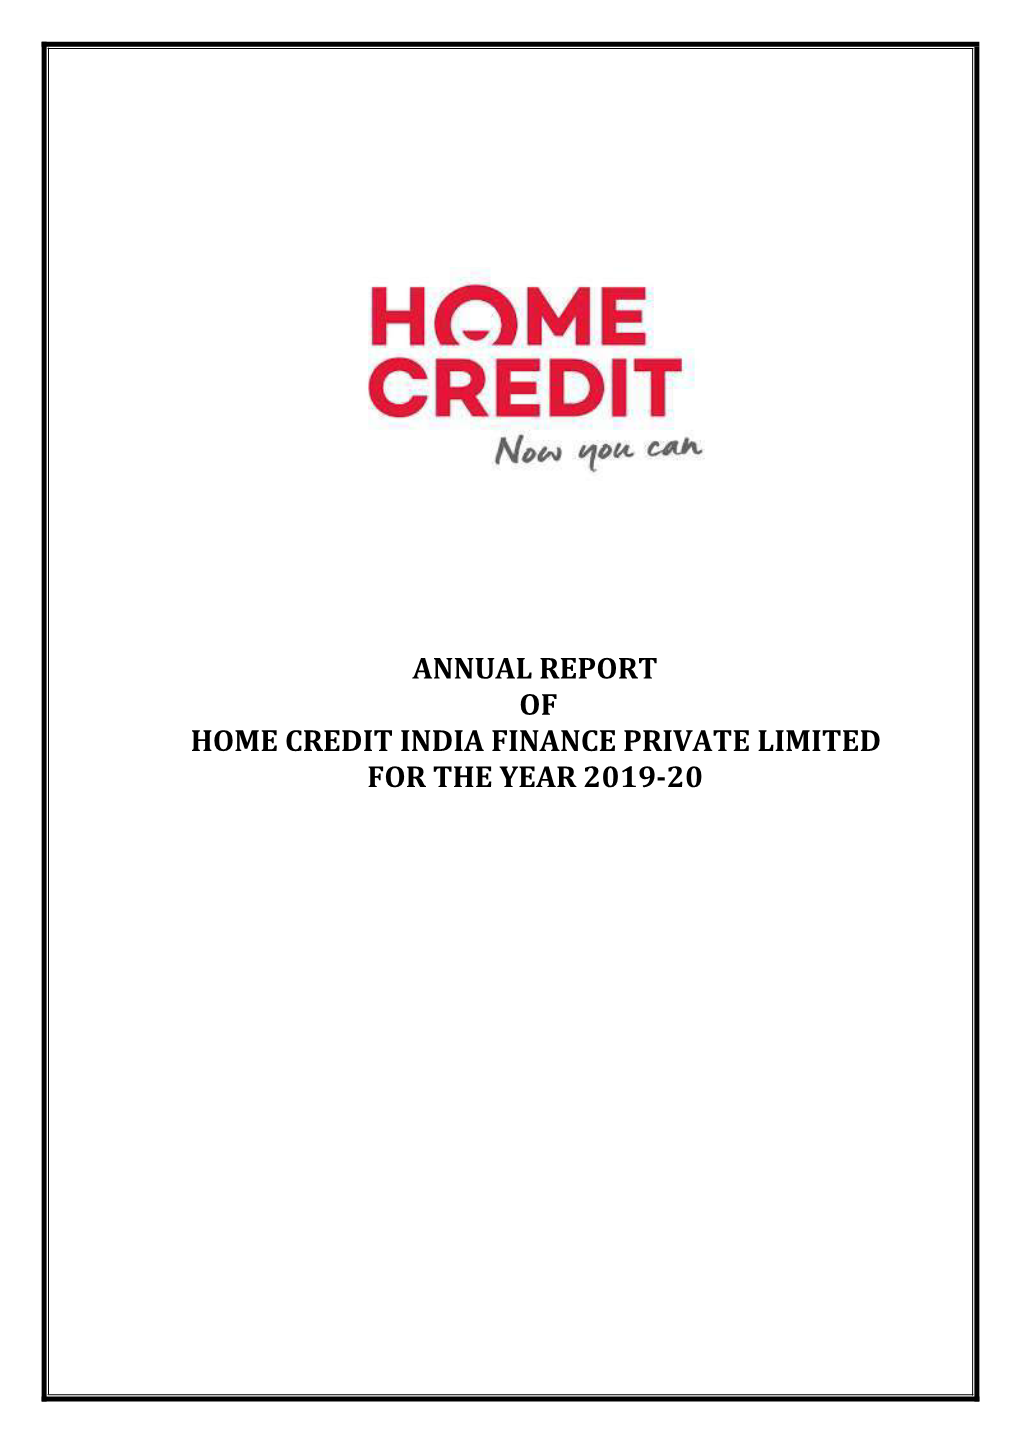 ANNUAL REPORT of HOME CREDIT INDIA FINANCE PRIVATE LIMITED for the YEAR 2019-20 B S R & Associates LLP Chartered Accountants